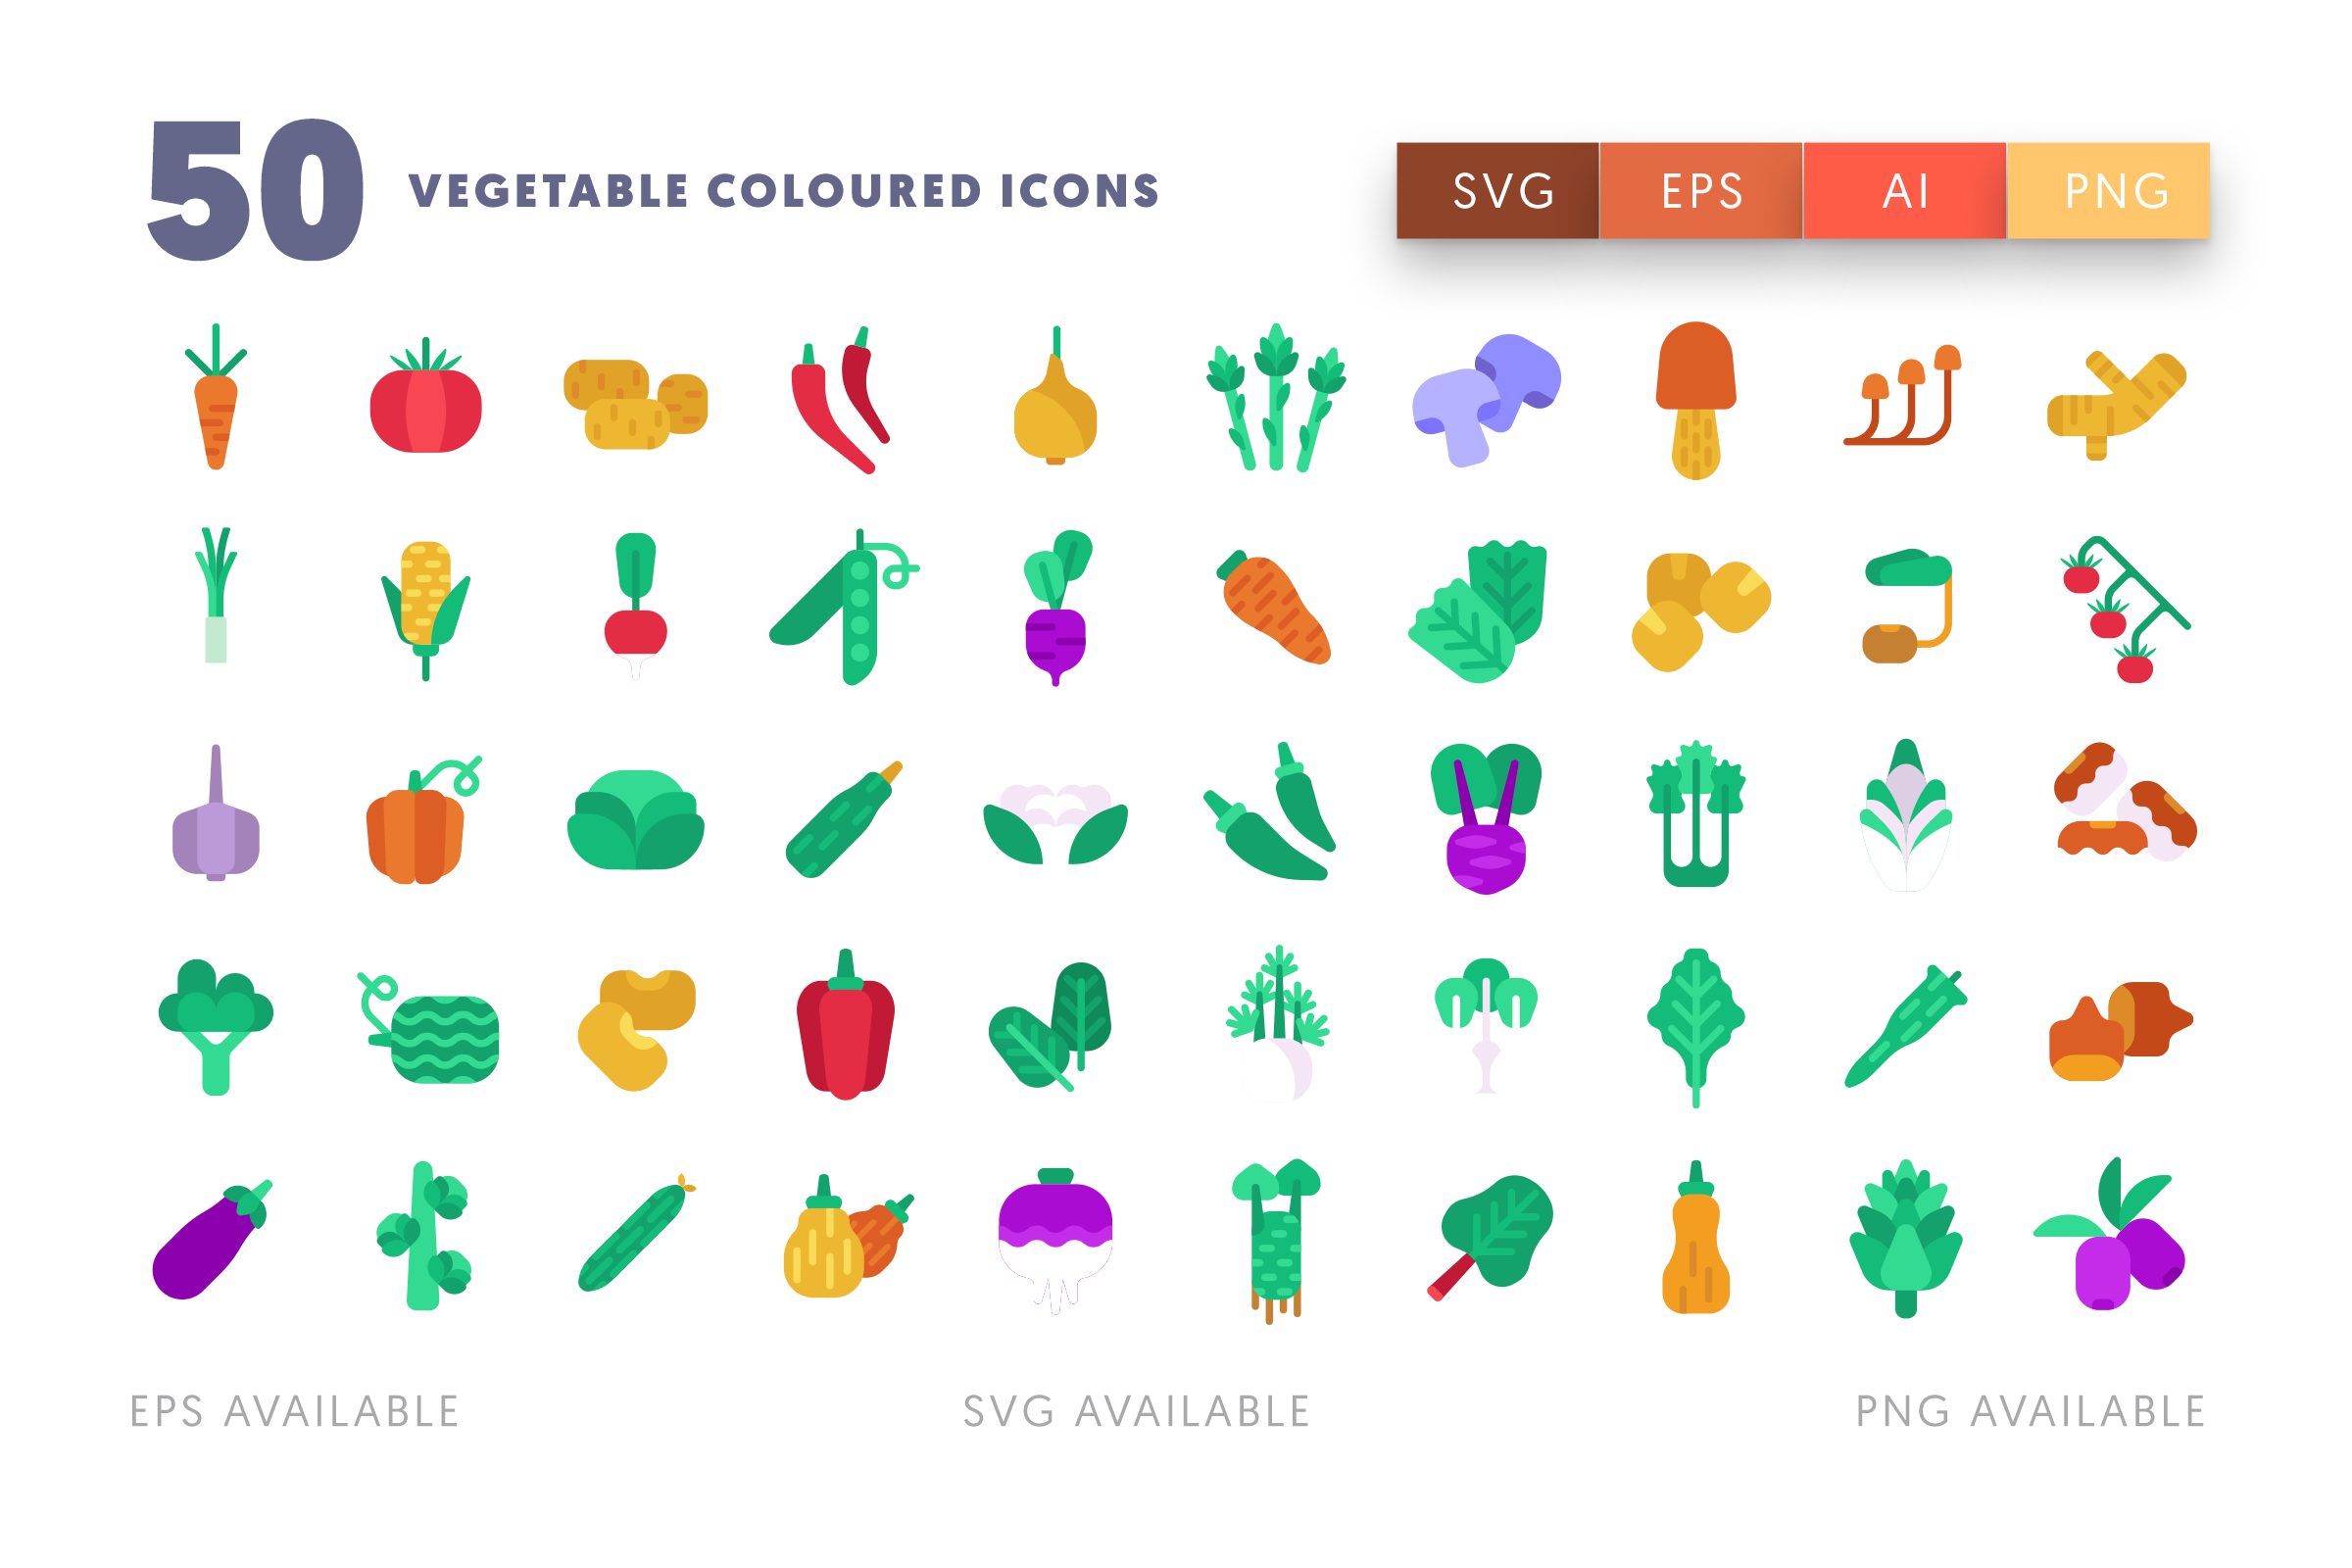 Vegetable Coloured icons png/svg/eps